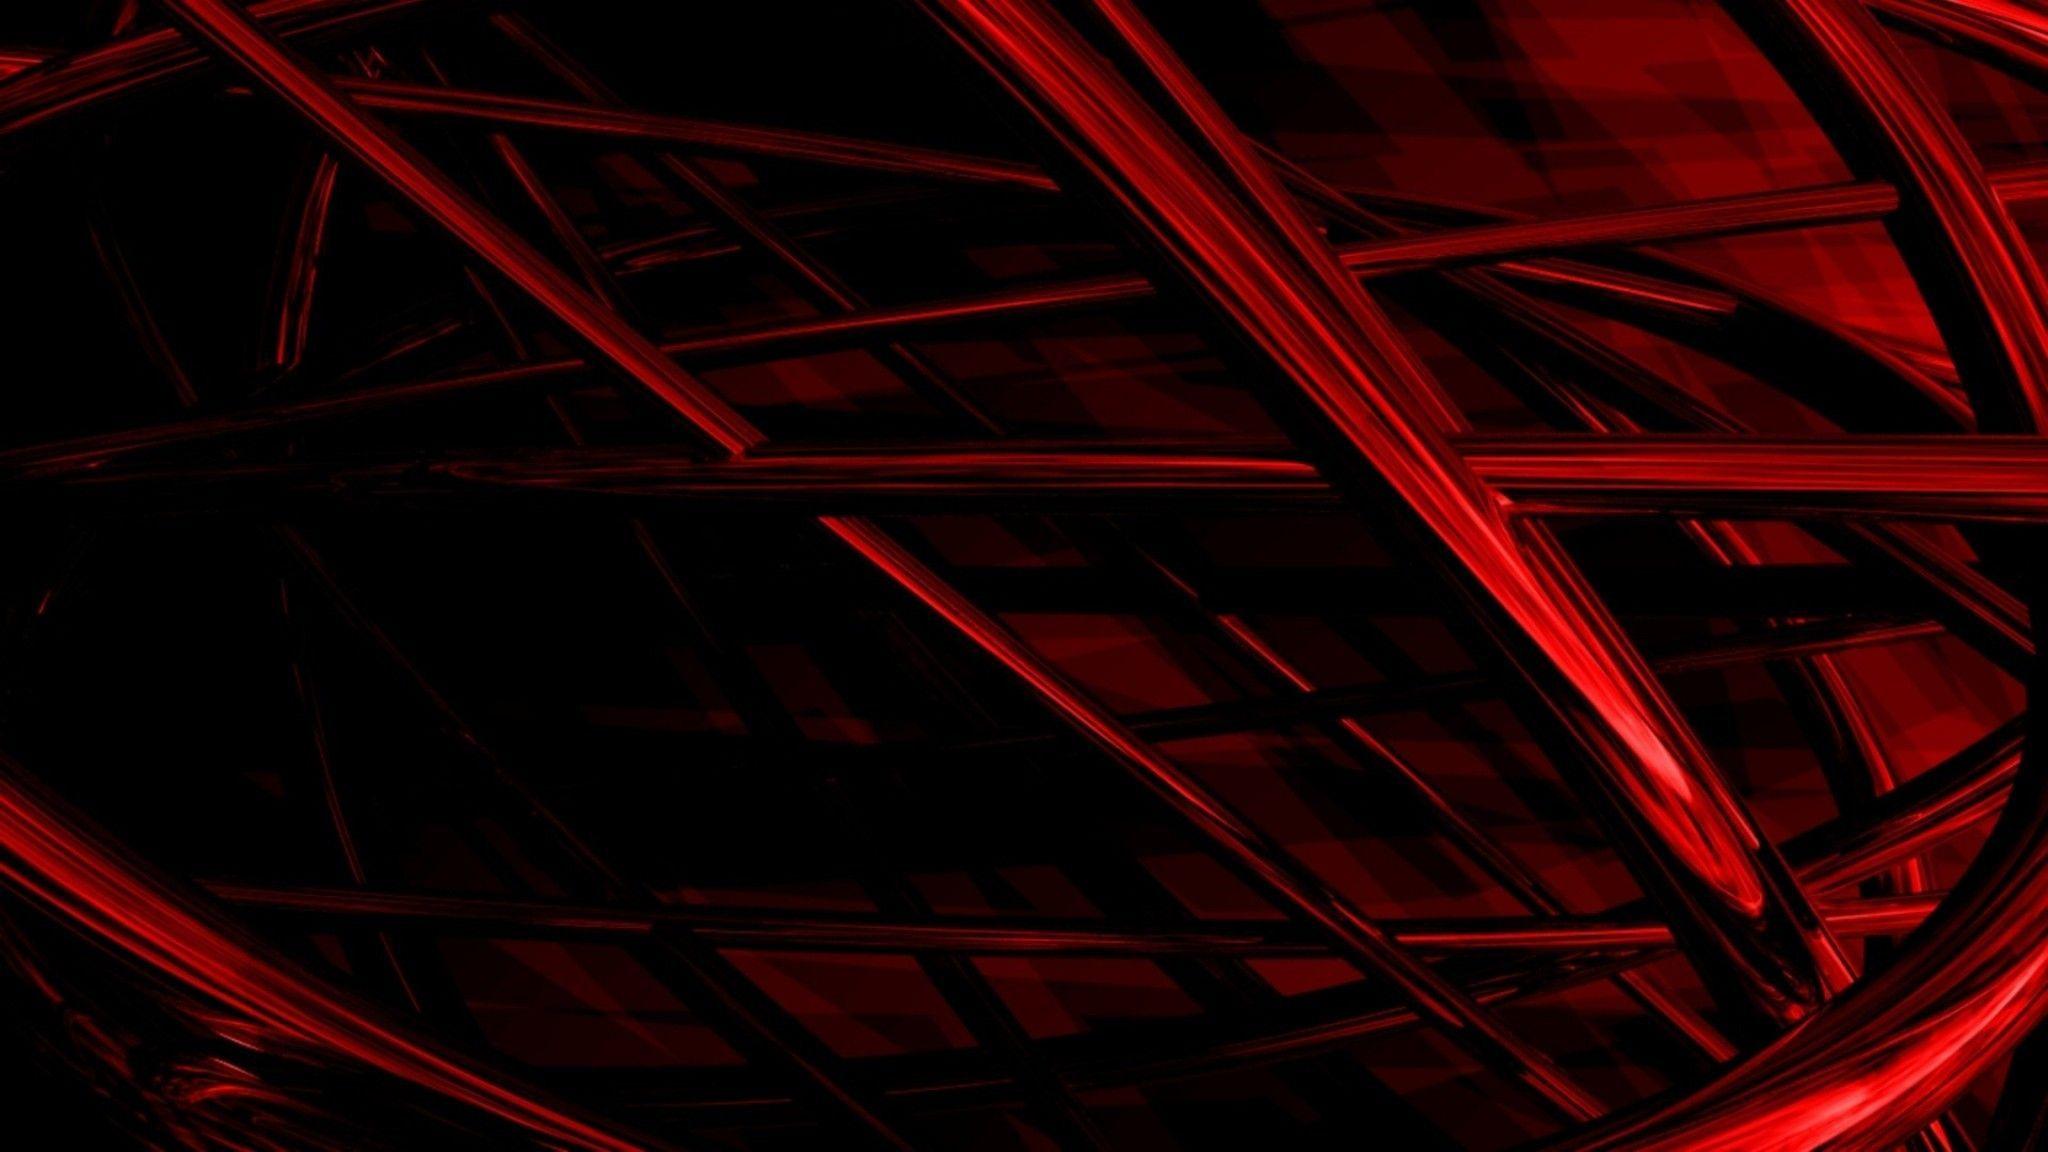 Black Red Shards Wallpapers - Top Free Black Red Shards Backgrounds